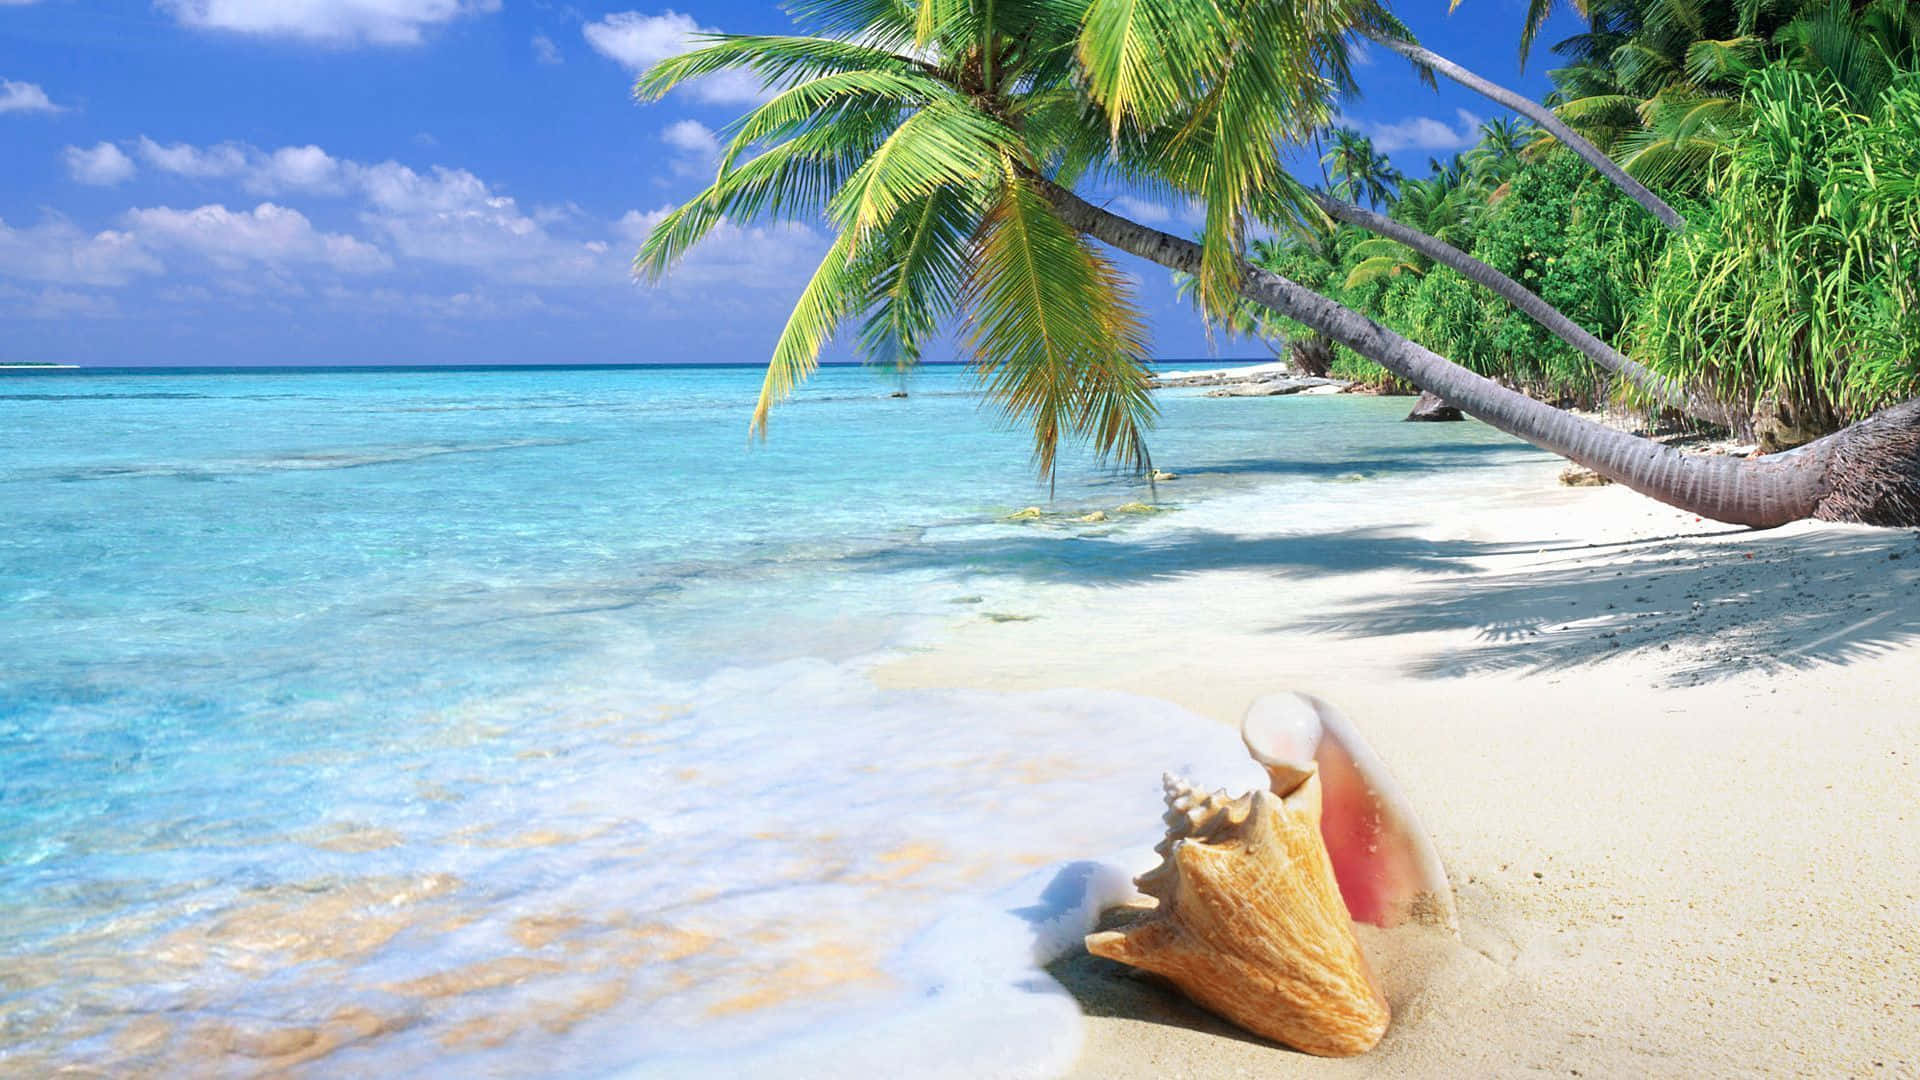 A Beach With Palm Trees And A Shell On The Sand Wallpaper